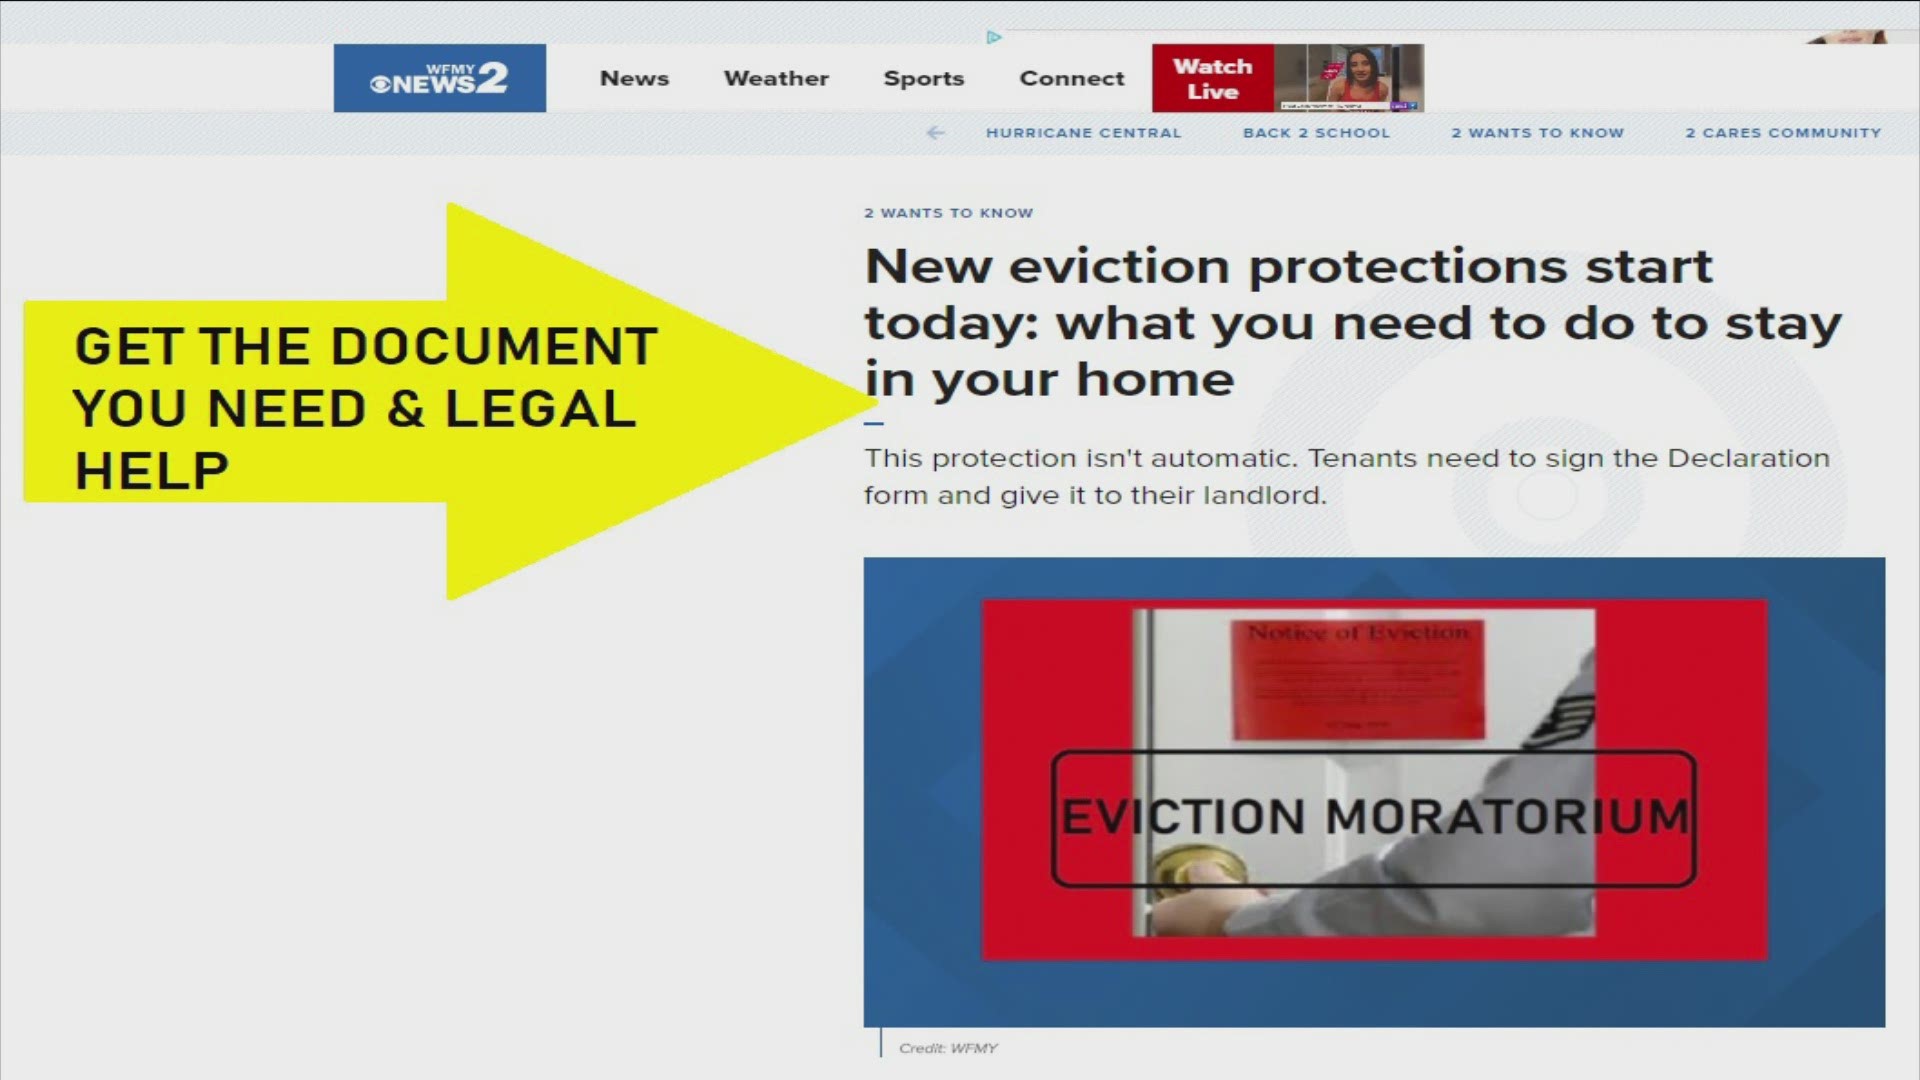 There are still protections against evictions, but if you miss this crucial step you won't be protected.